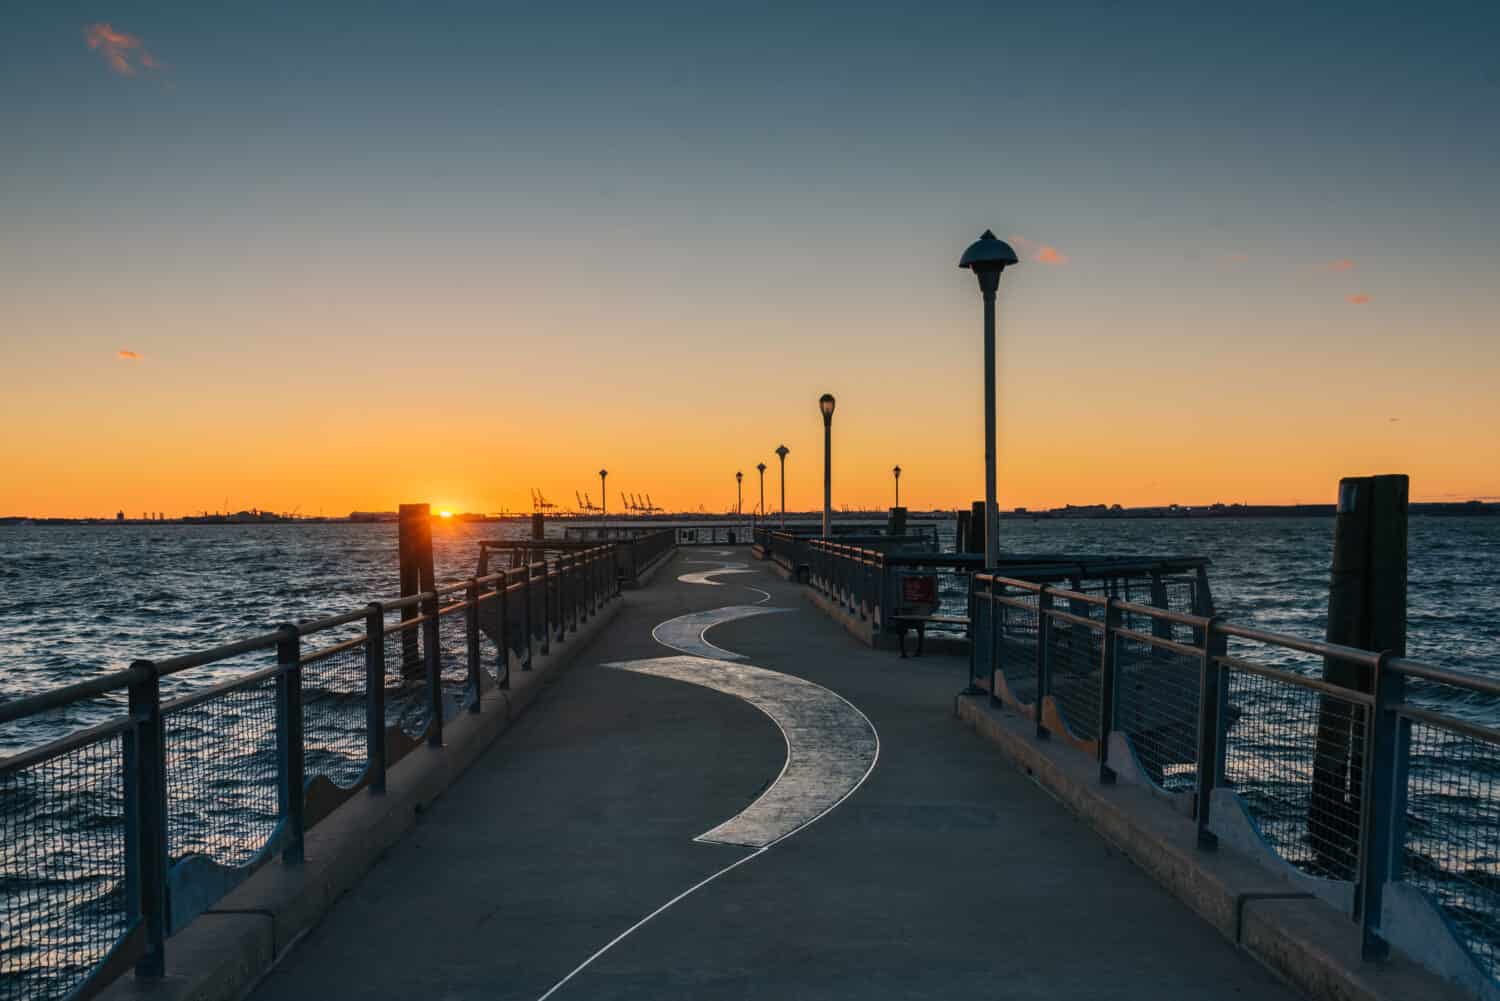 Sunset at Louis Valentino, Jr. Pier, in Red Hook, Brooklyn, New York City